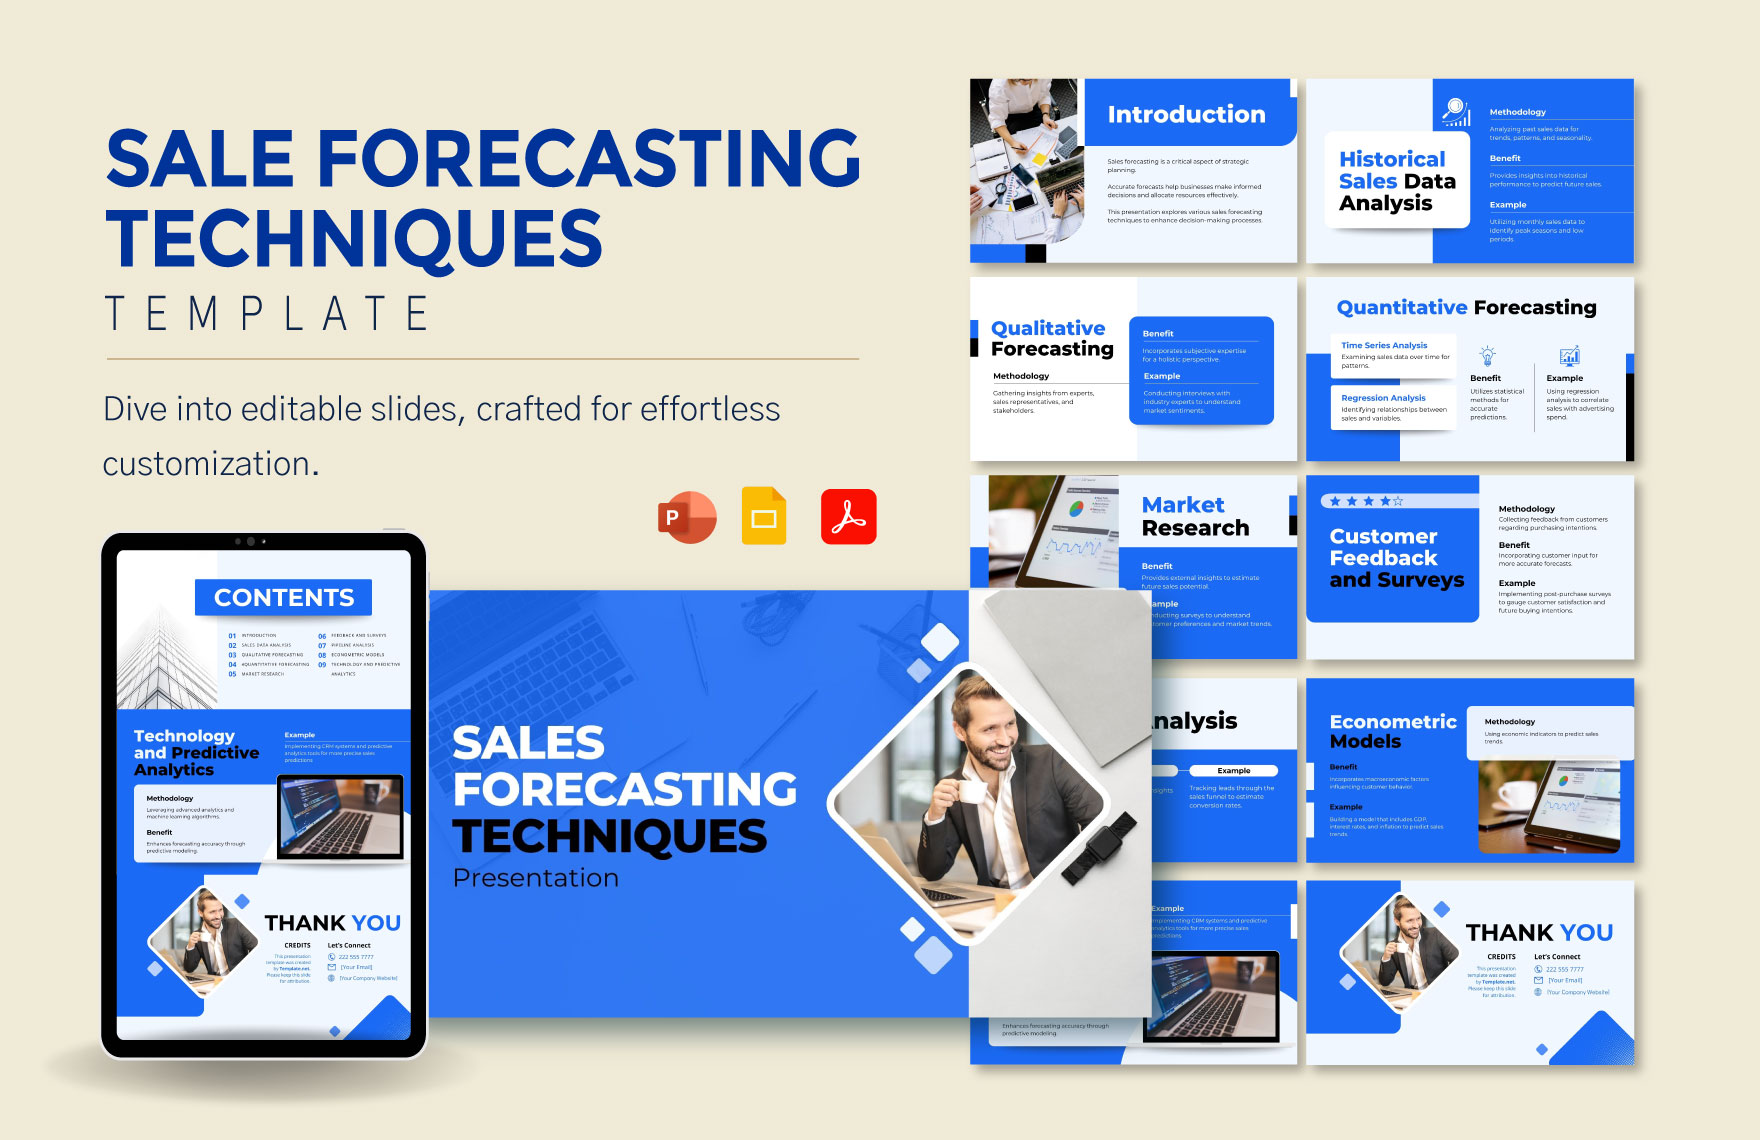 Sales Forecasting Techniques Template